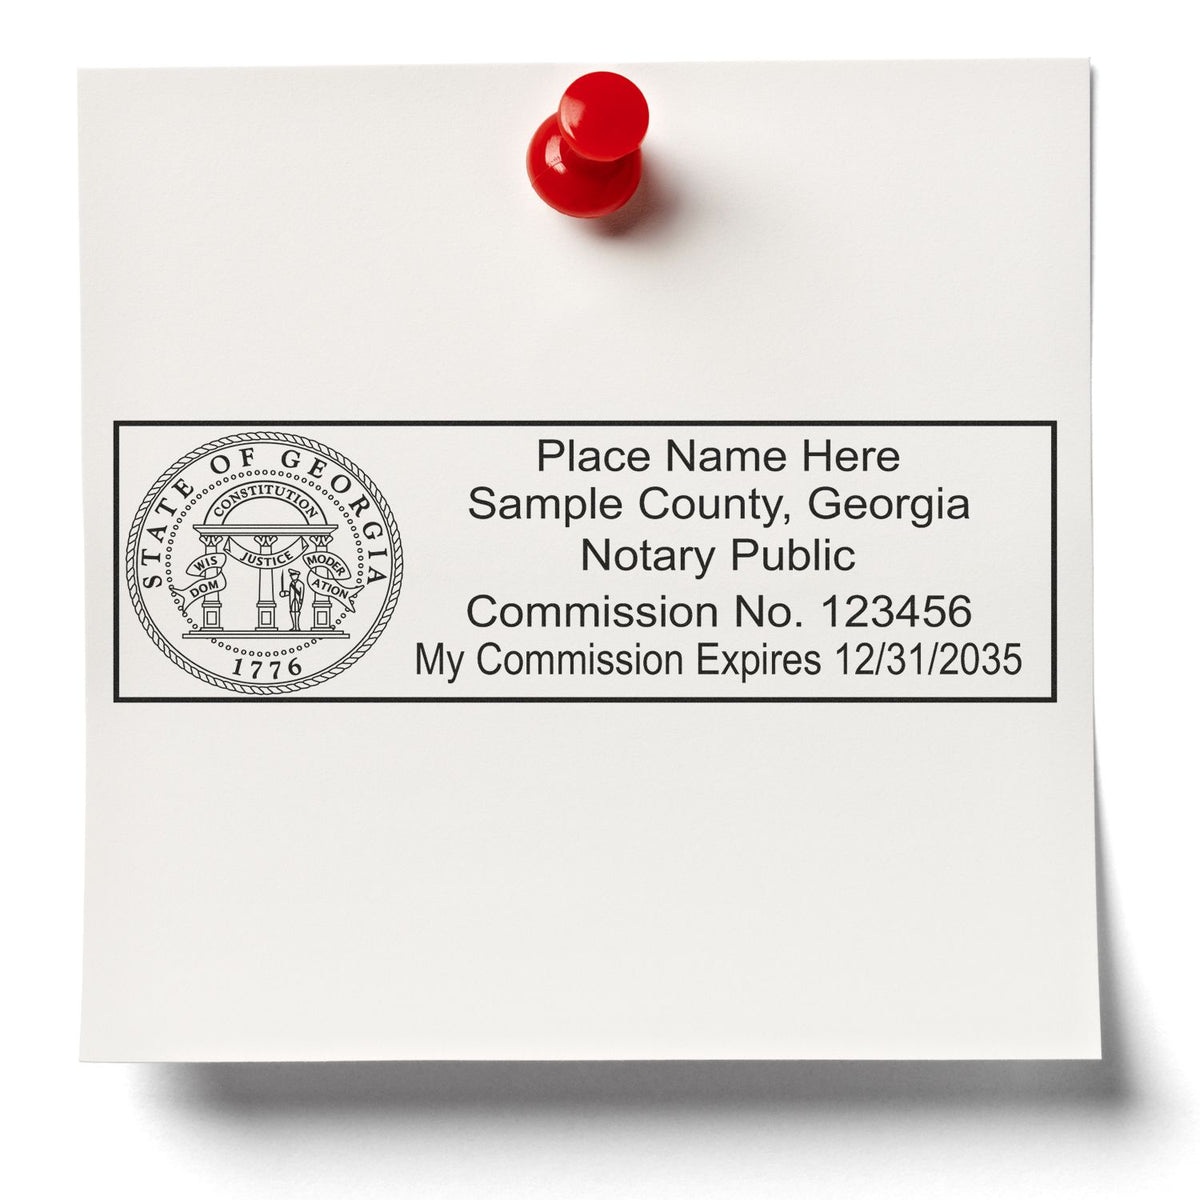 Another Example of a stamped impression of the Heavy-Duty Georgia Rectangular Notary Stamp on a piece of office paper.